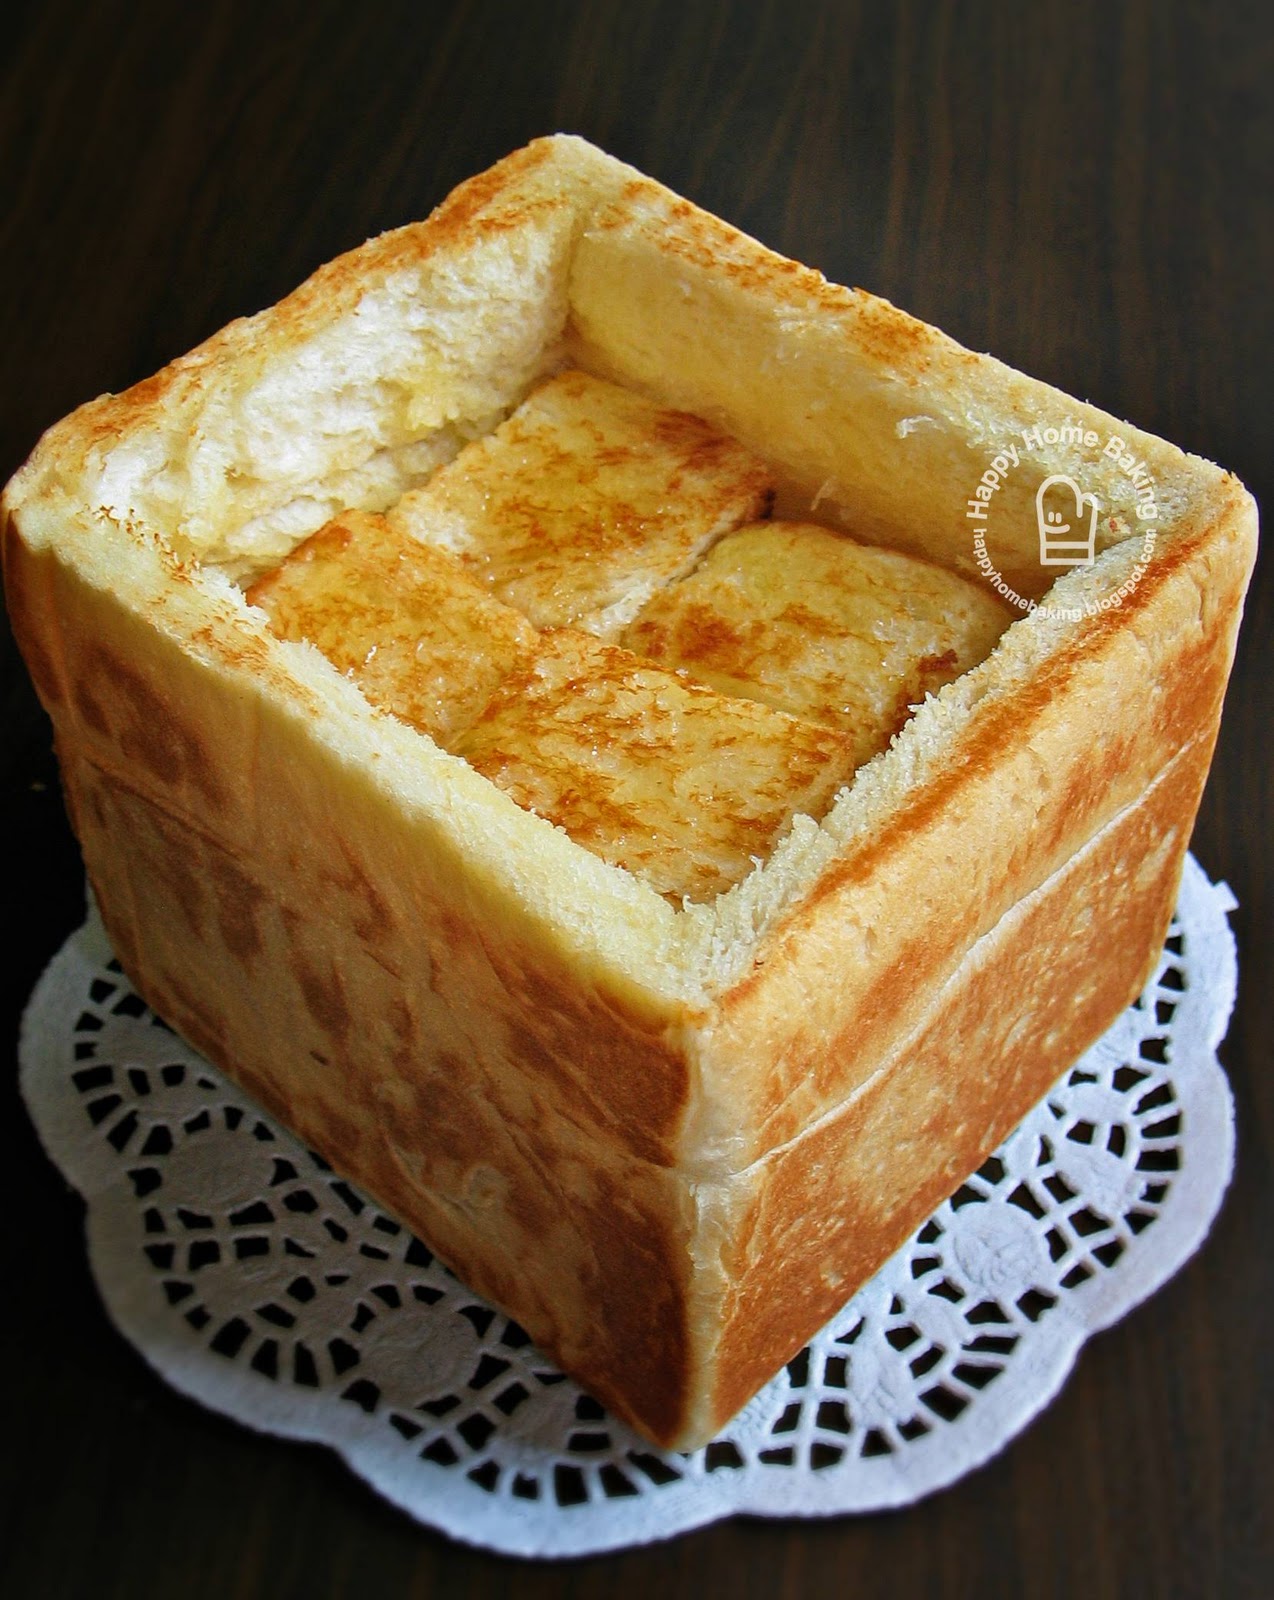 Happy Home Baking: dessert in a toast box